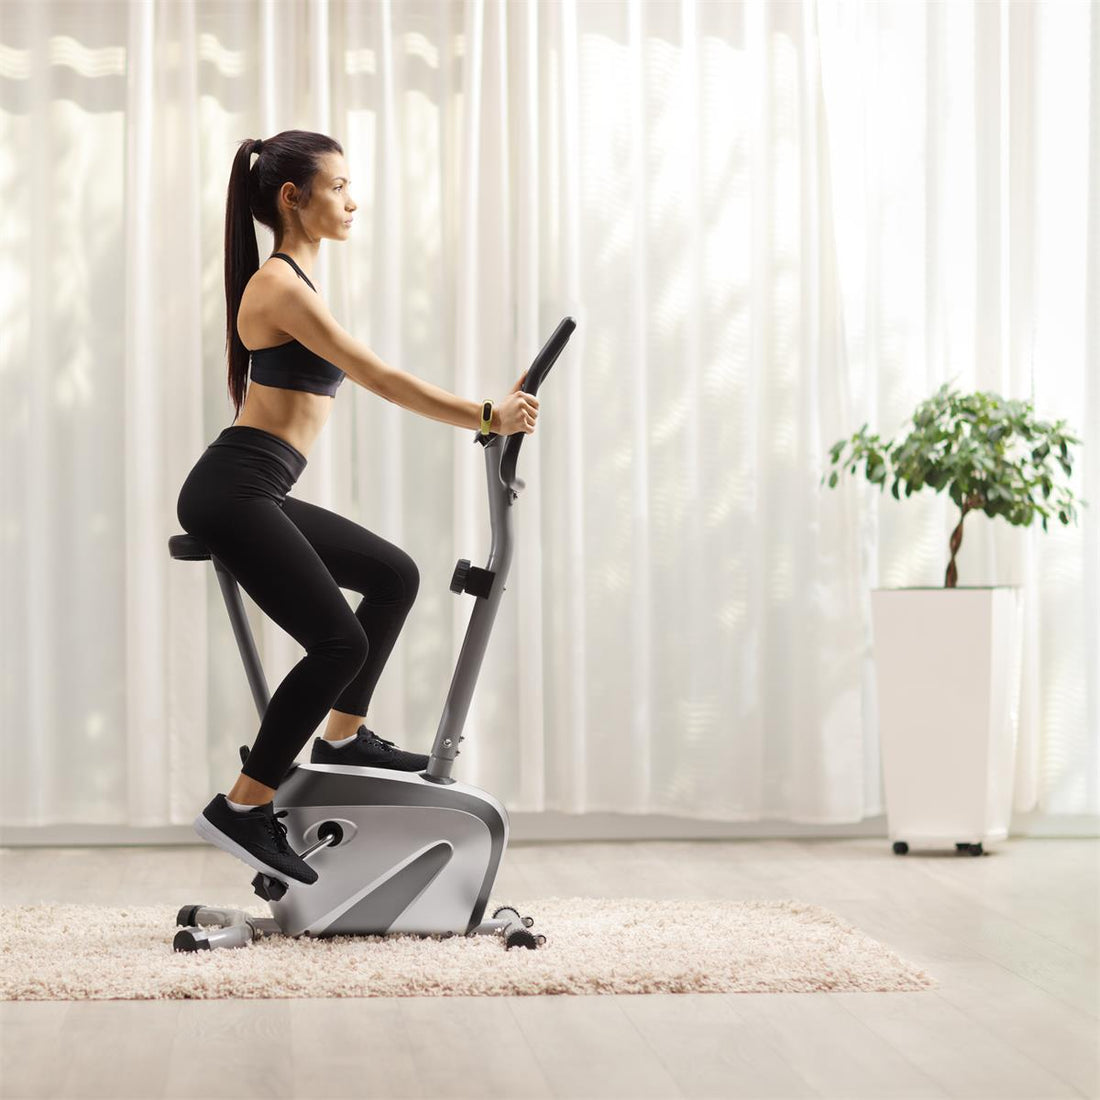 How Long Should a Beginner Use An Exercise Bike?